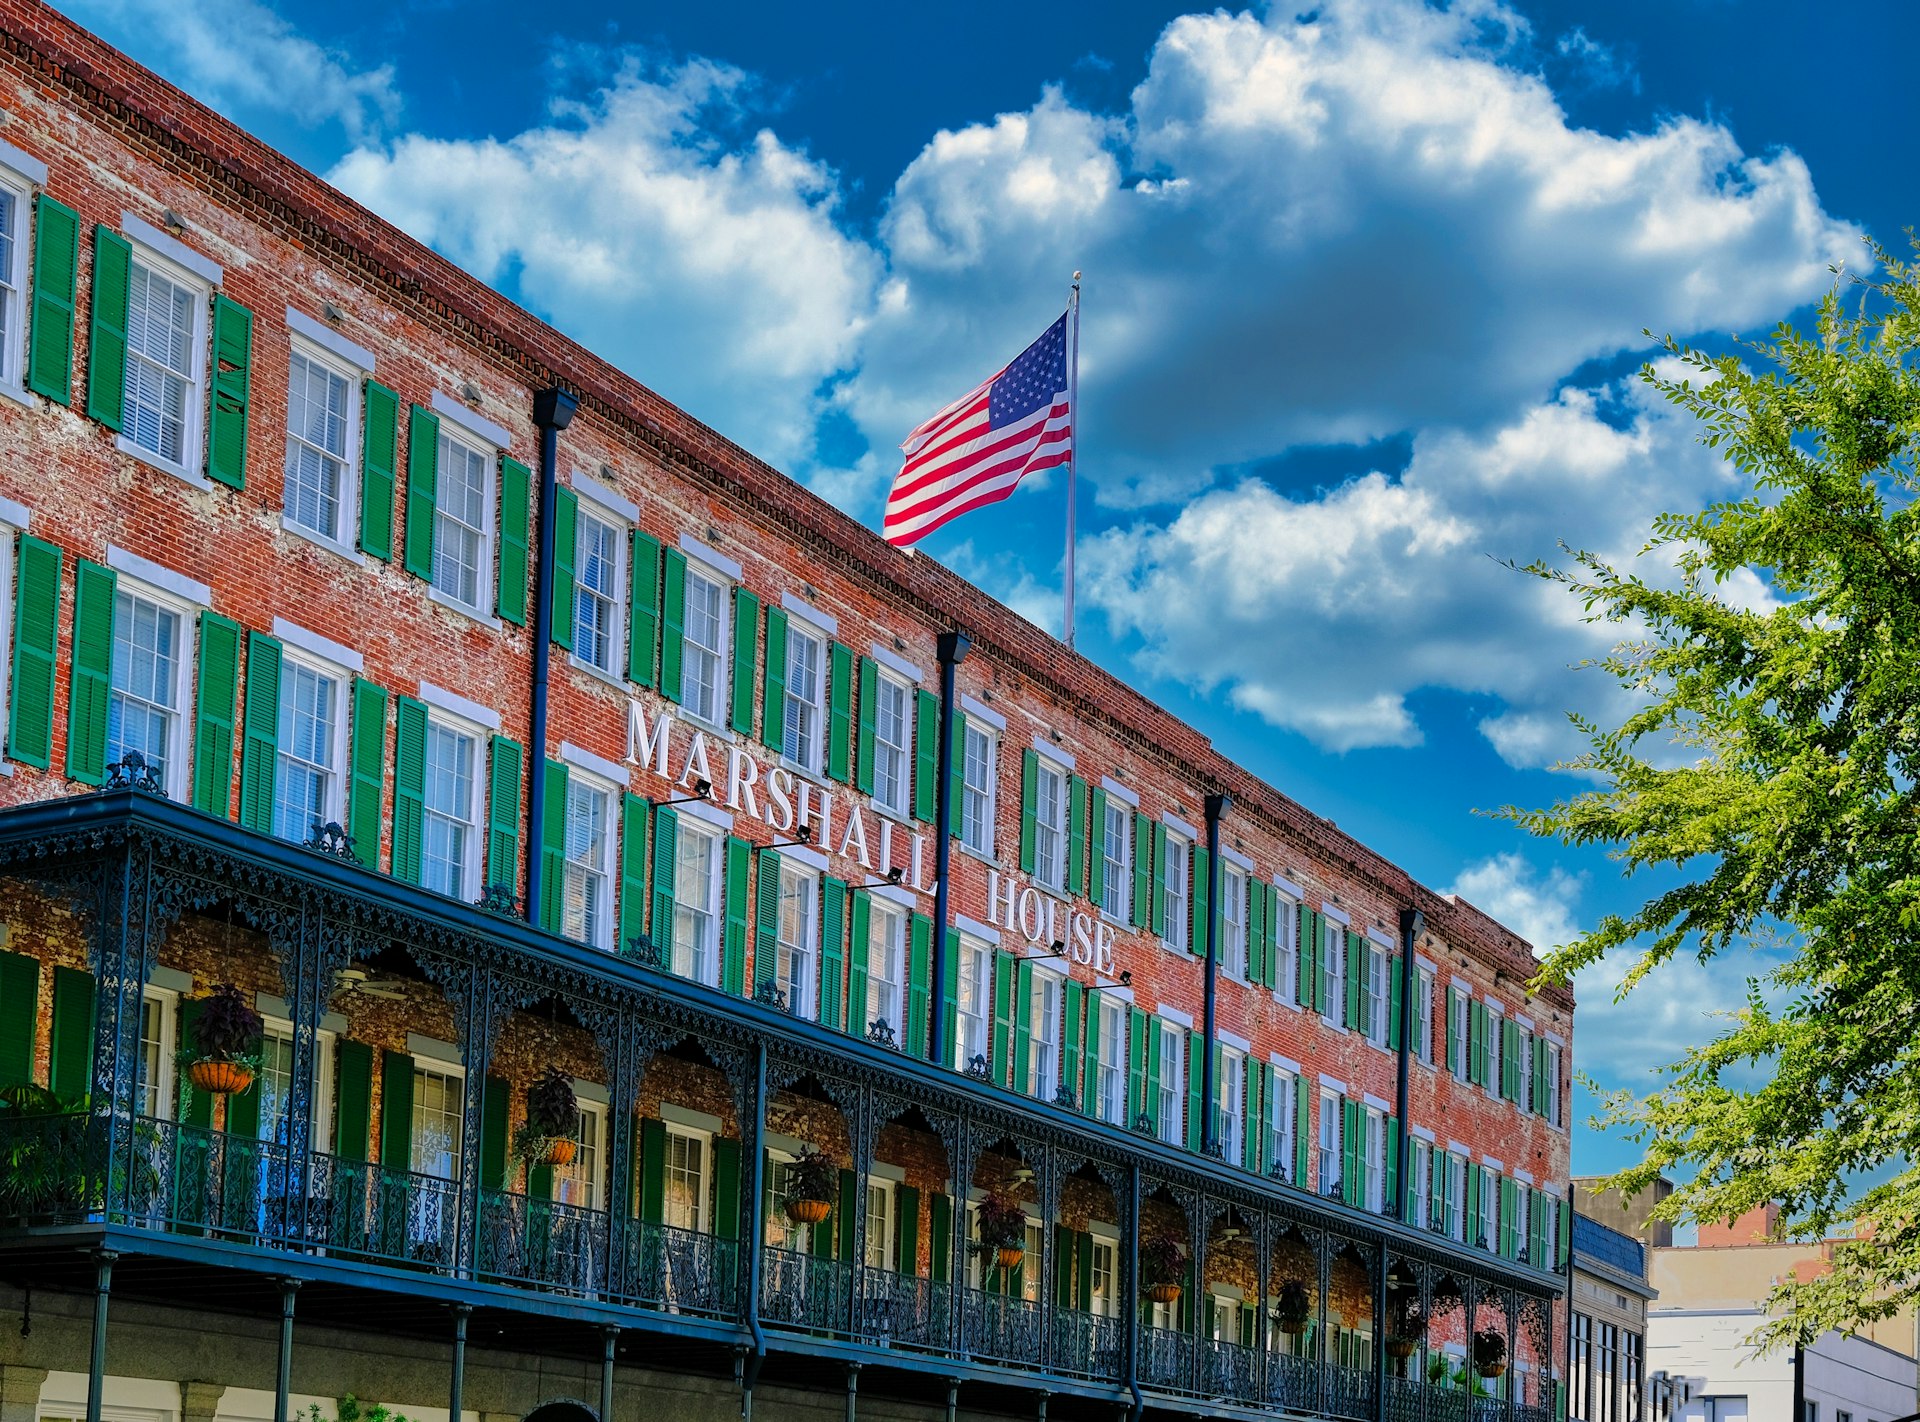 Marshall House is one of the six Historic Inns of Savannah which were built in the mid-1800s 